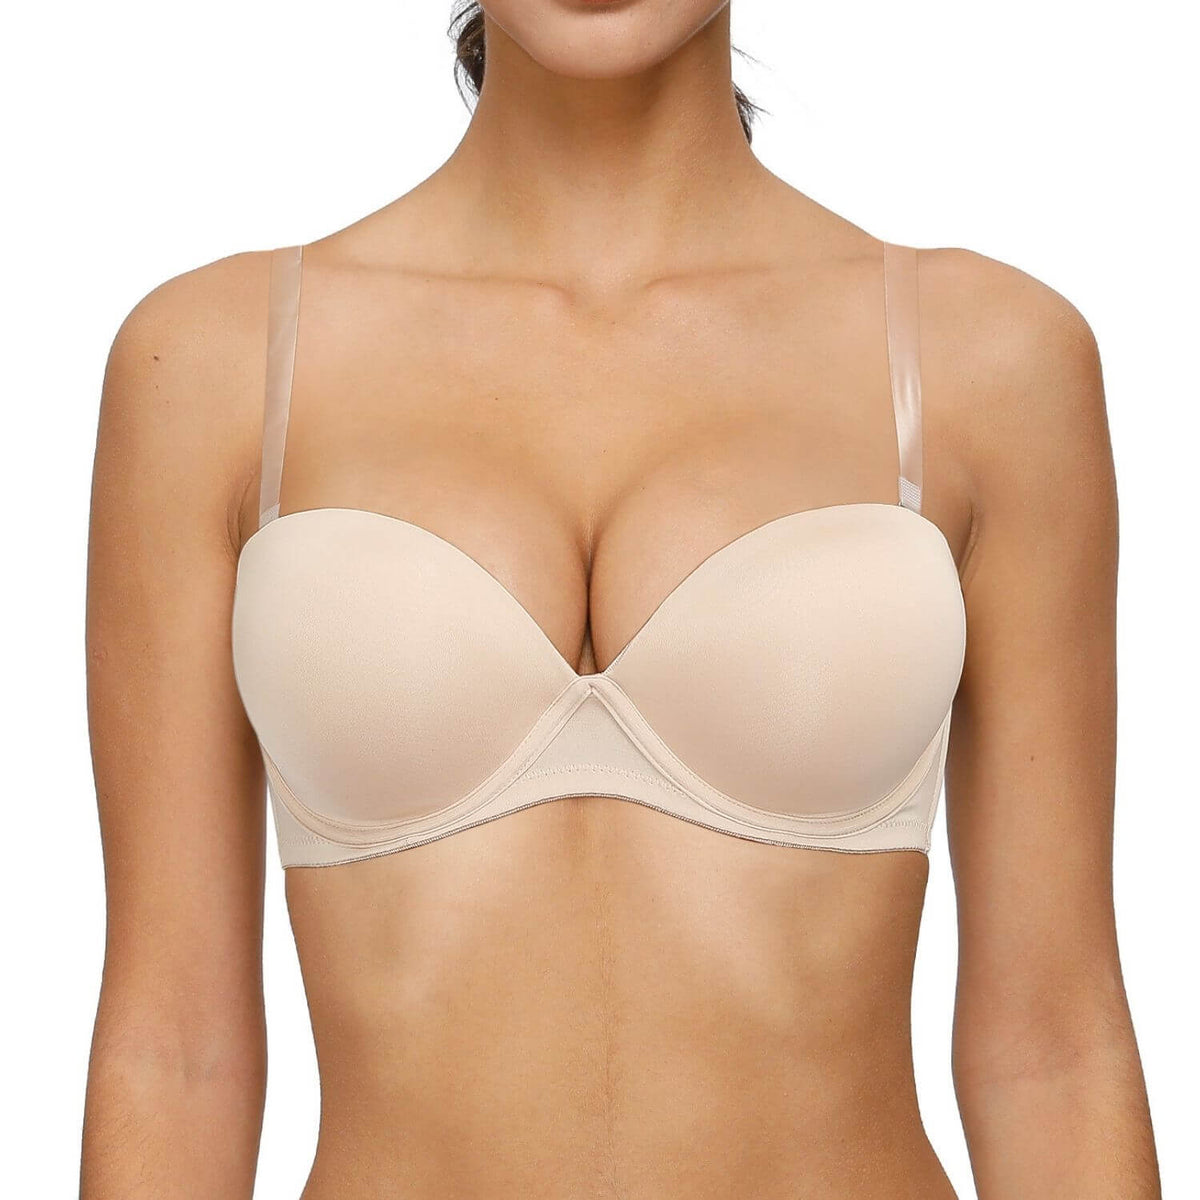 YANDW Front Closure Push Up Bra Strappy Thick Padded Cross Back Add 2 Cup  Plunge Seamless Underwire Bras White,32A 